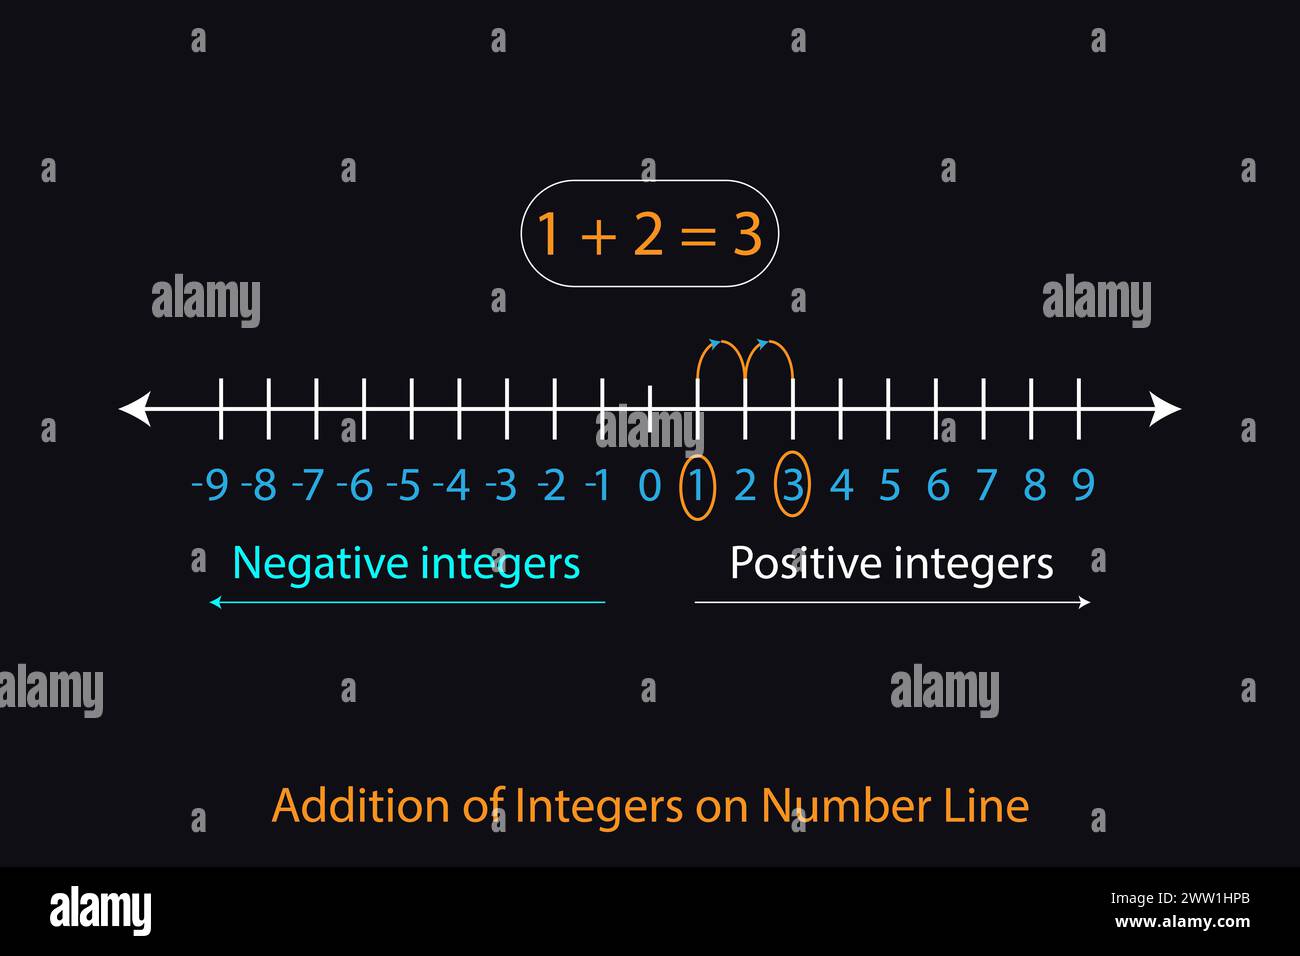 Representing integers on number line vectors in mathematics resources for teachers and students. Stock Vector